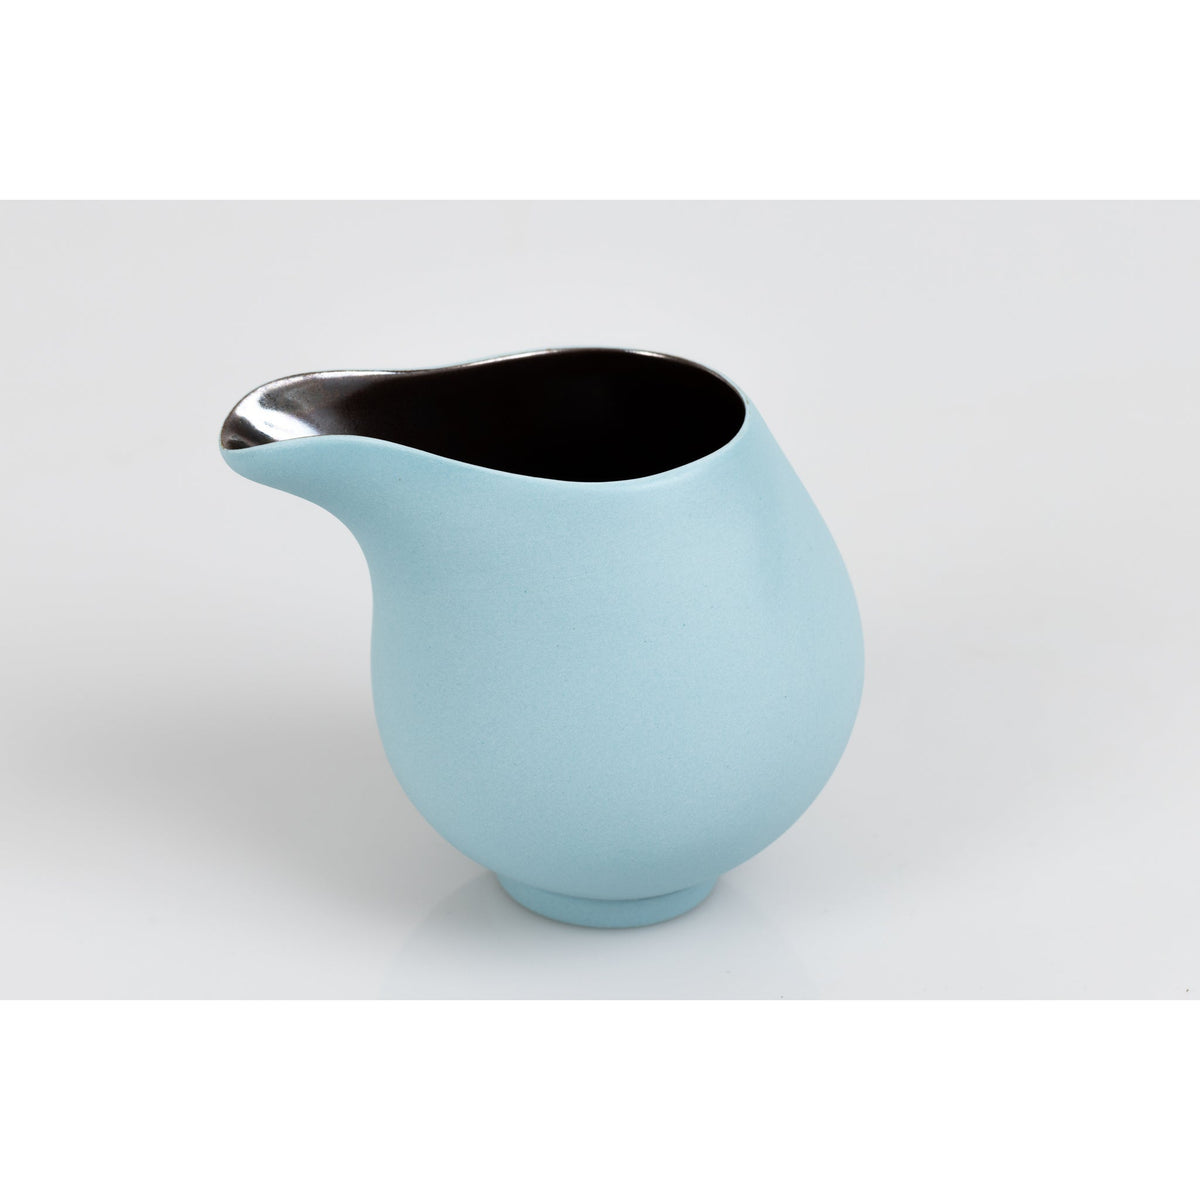 KSC2 Flow, Ocean Blue Stoneware Jug by Kate Schuricht, available at Padstow Gallery, Cornwall